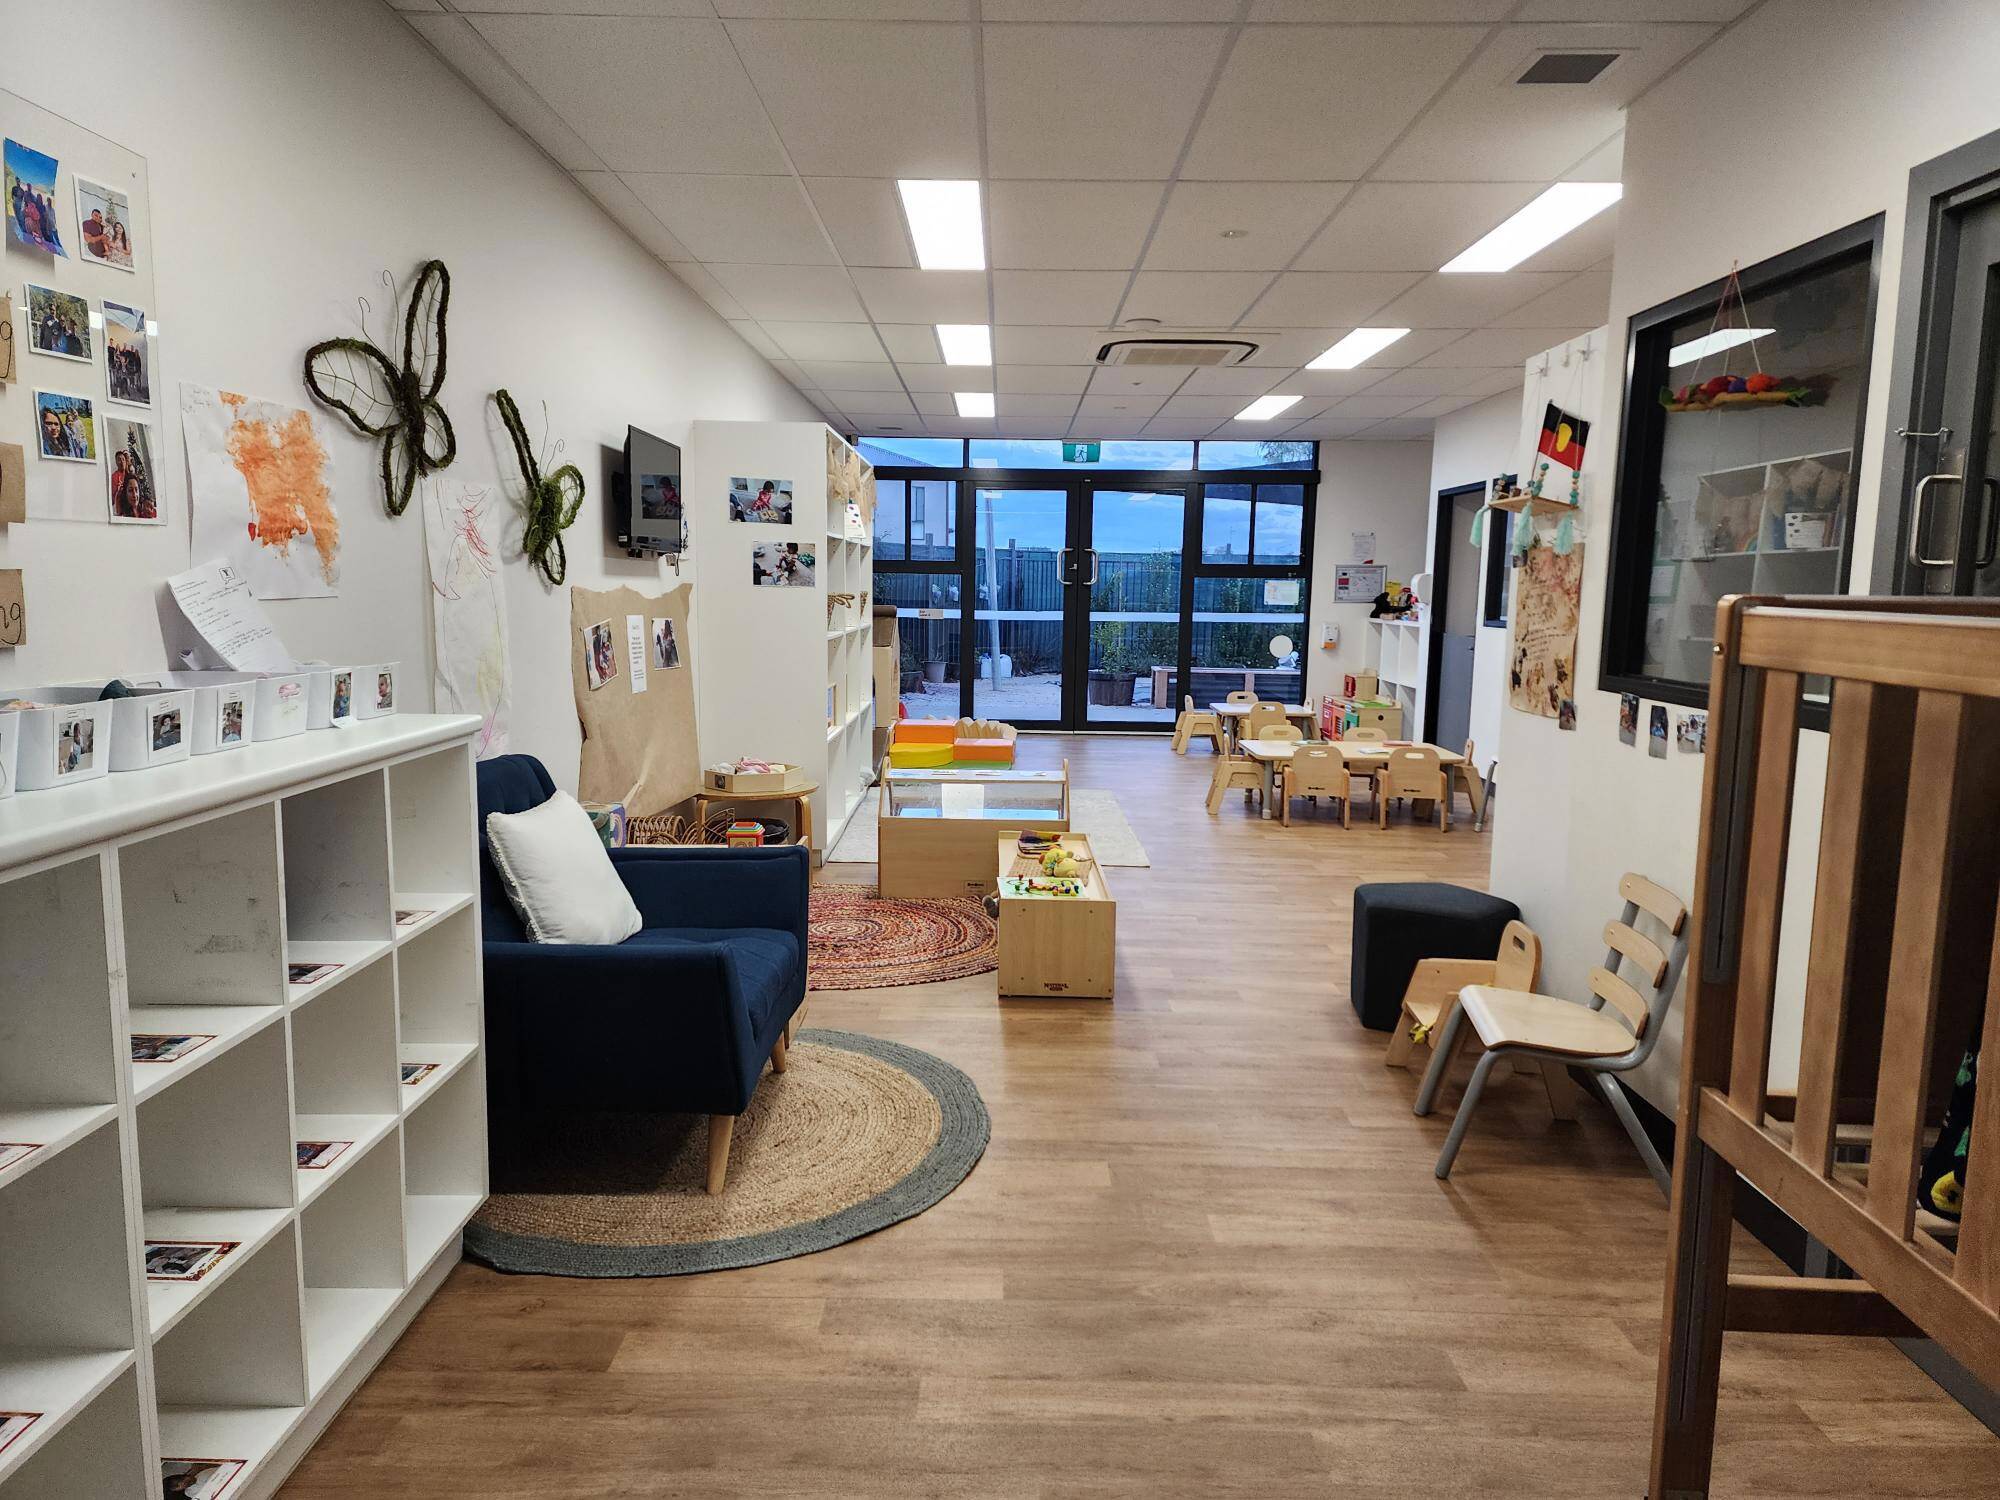 Wyndham Vale YMCA Early Learning Centre